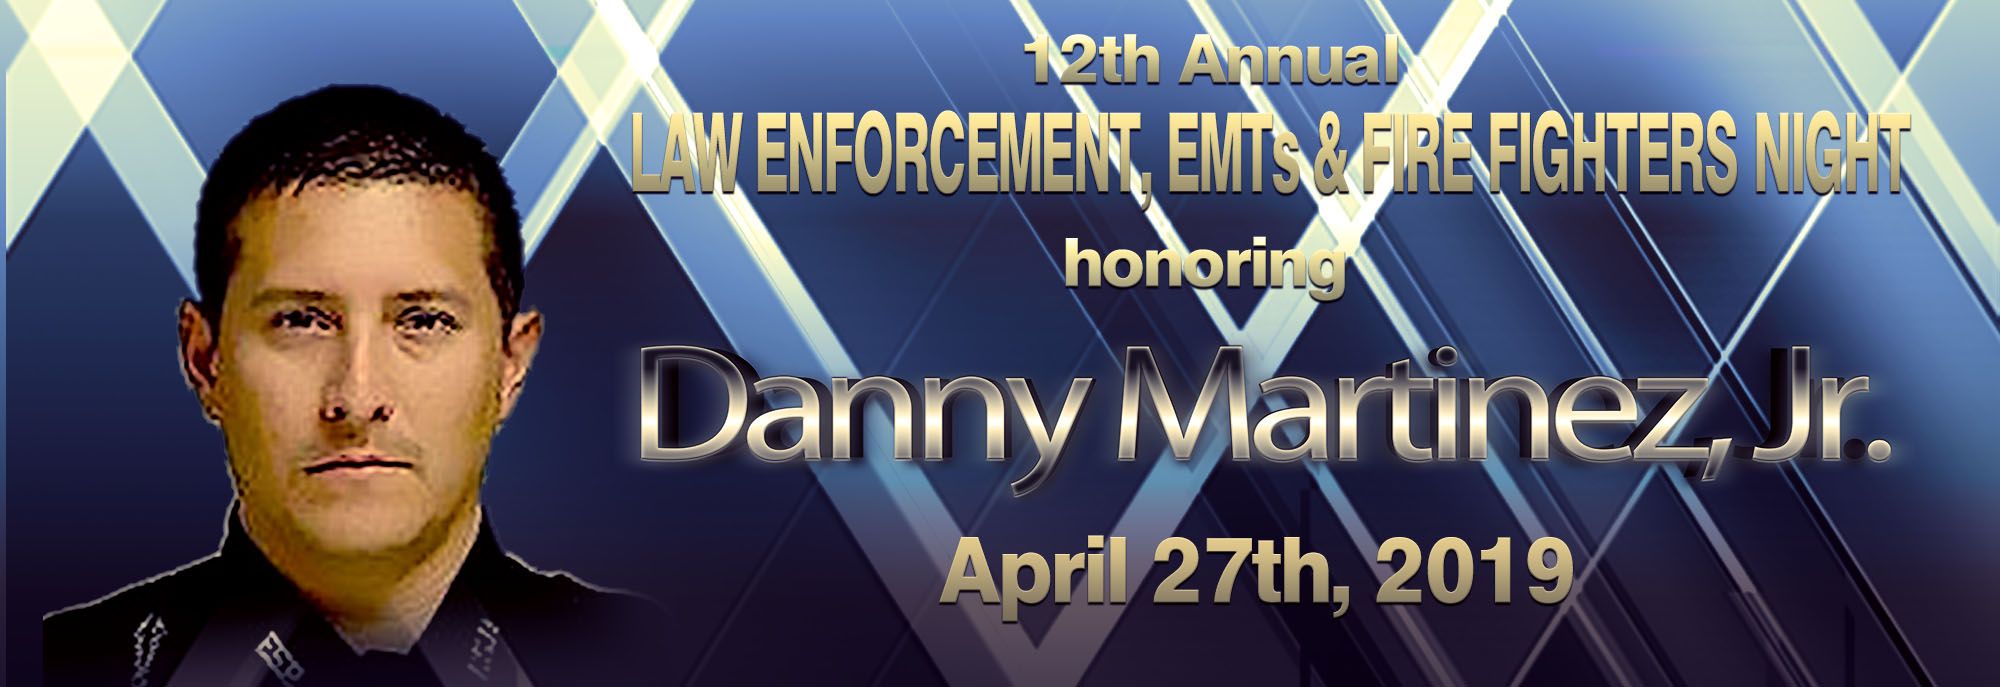 12th Annual Law Enforcement, EMTs and FIrefighters Night Honoring Danny Martinez, Jr.